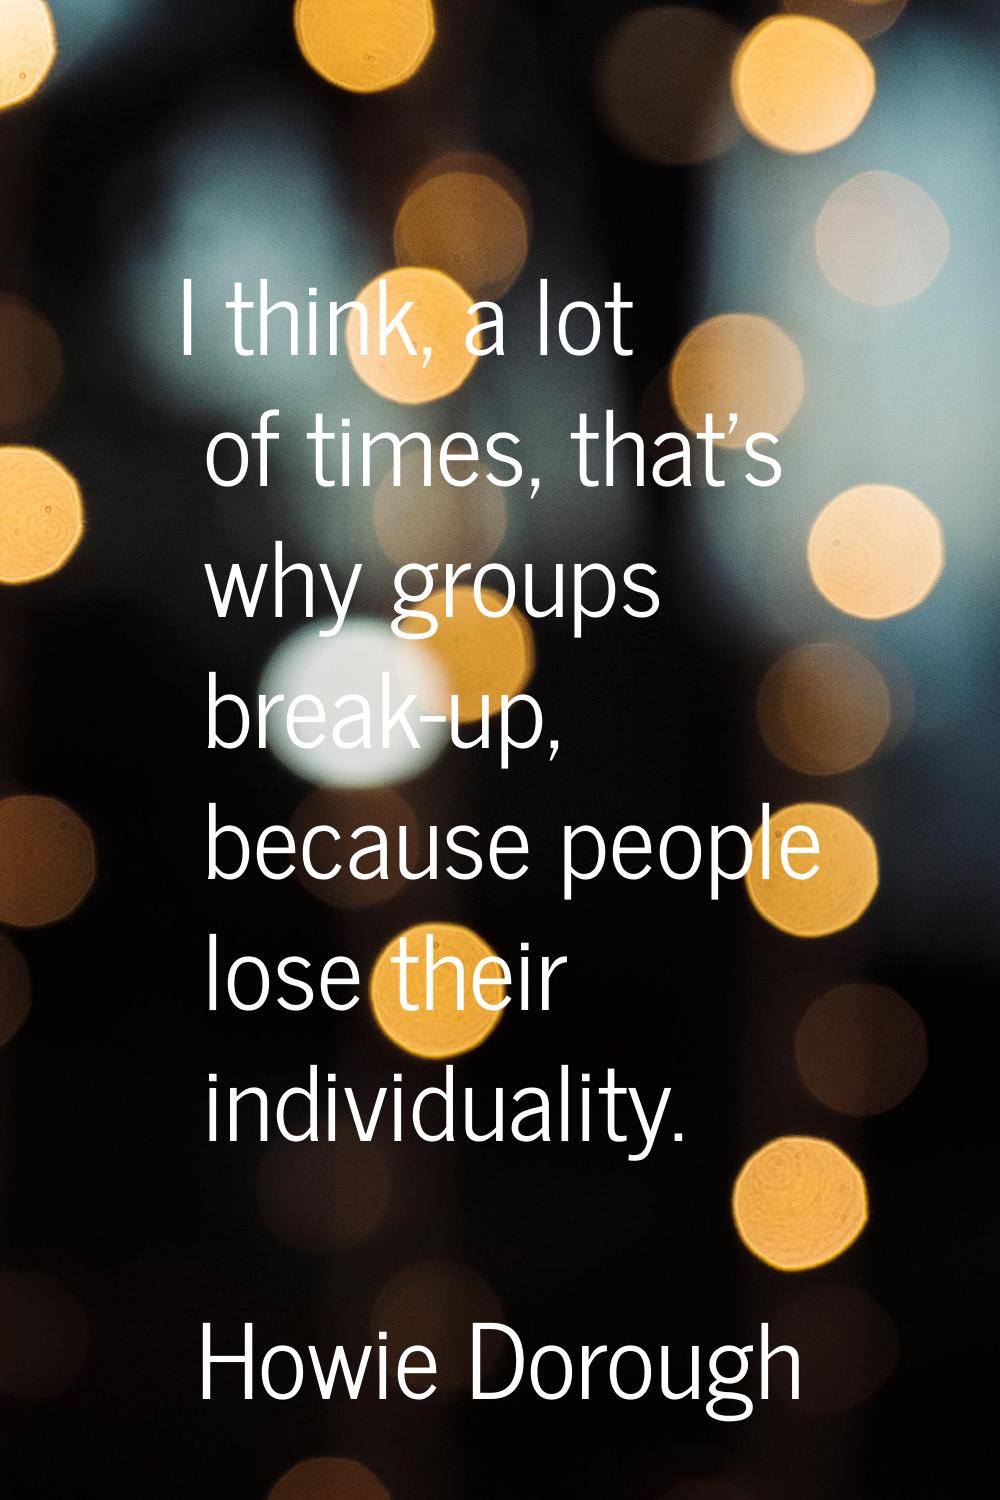 I think, a lot of times, that's why groups break-up, because people lose their individuality.